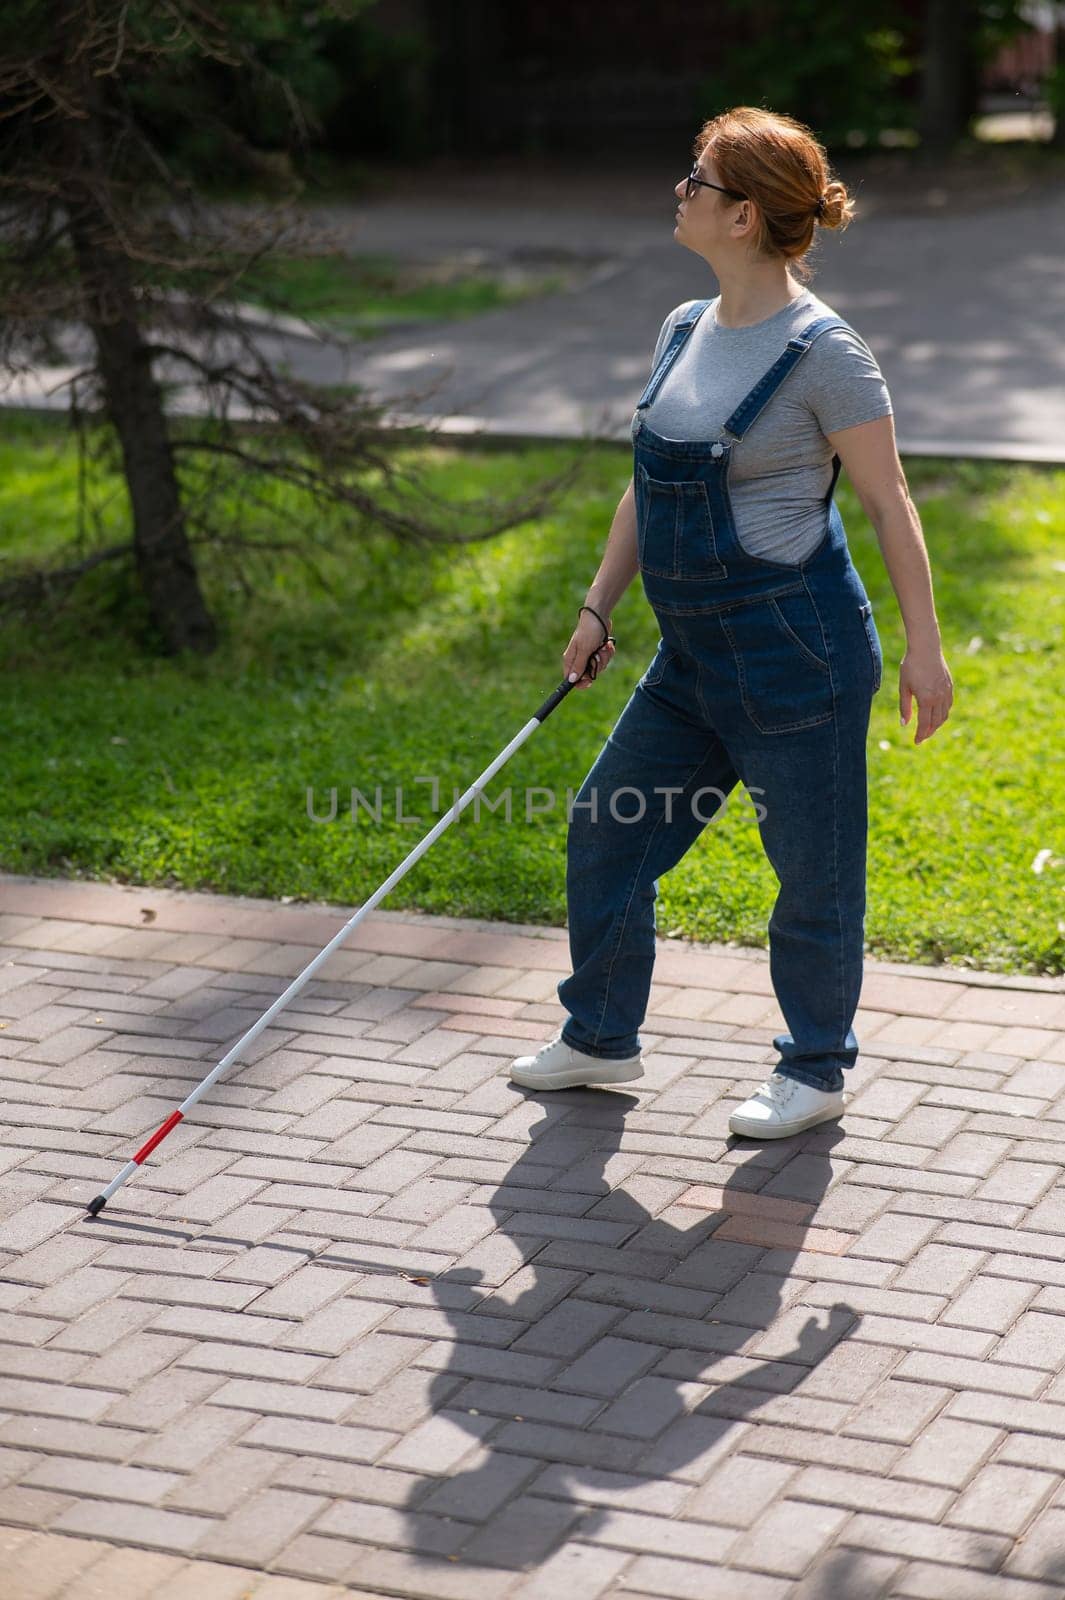 Blind pregnant woman walking in the park with a cane